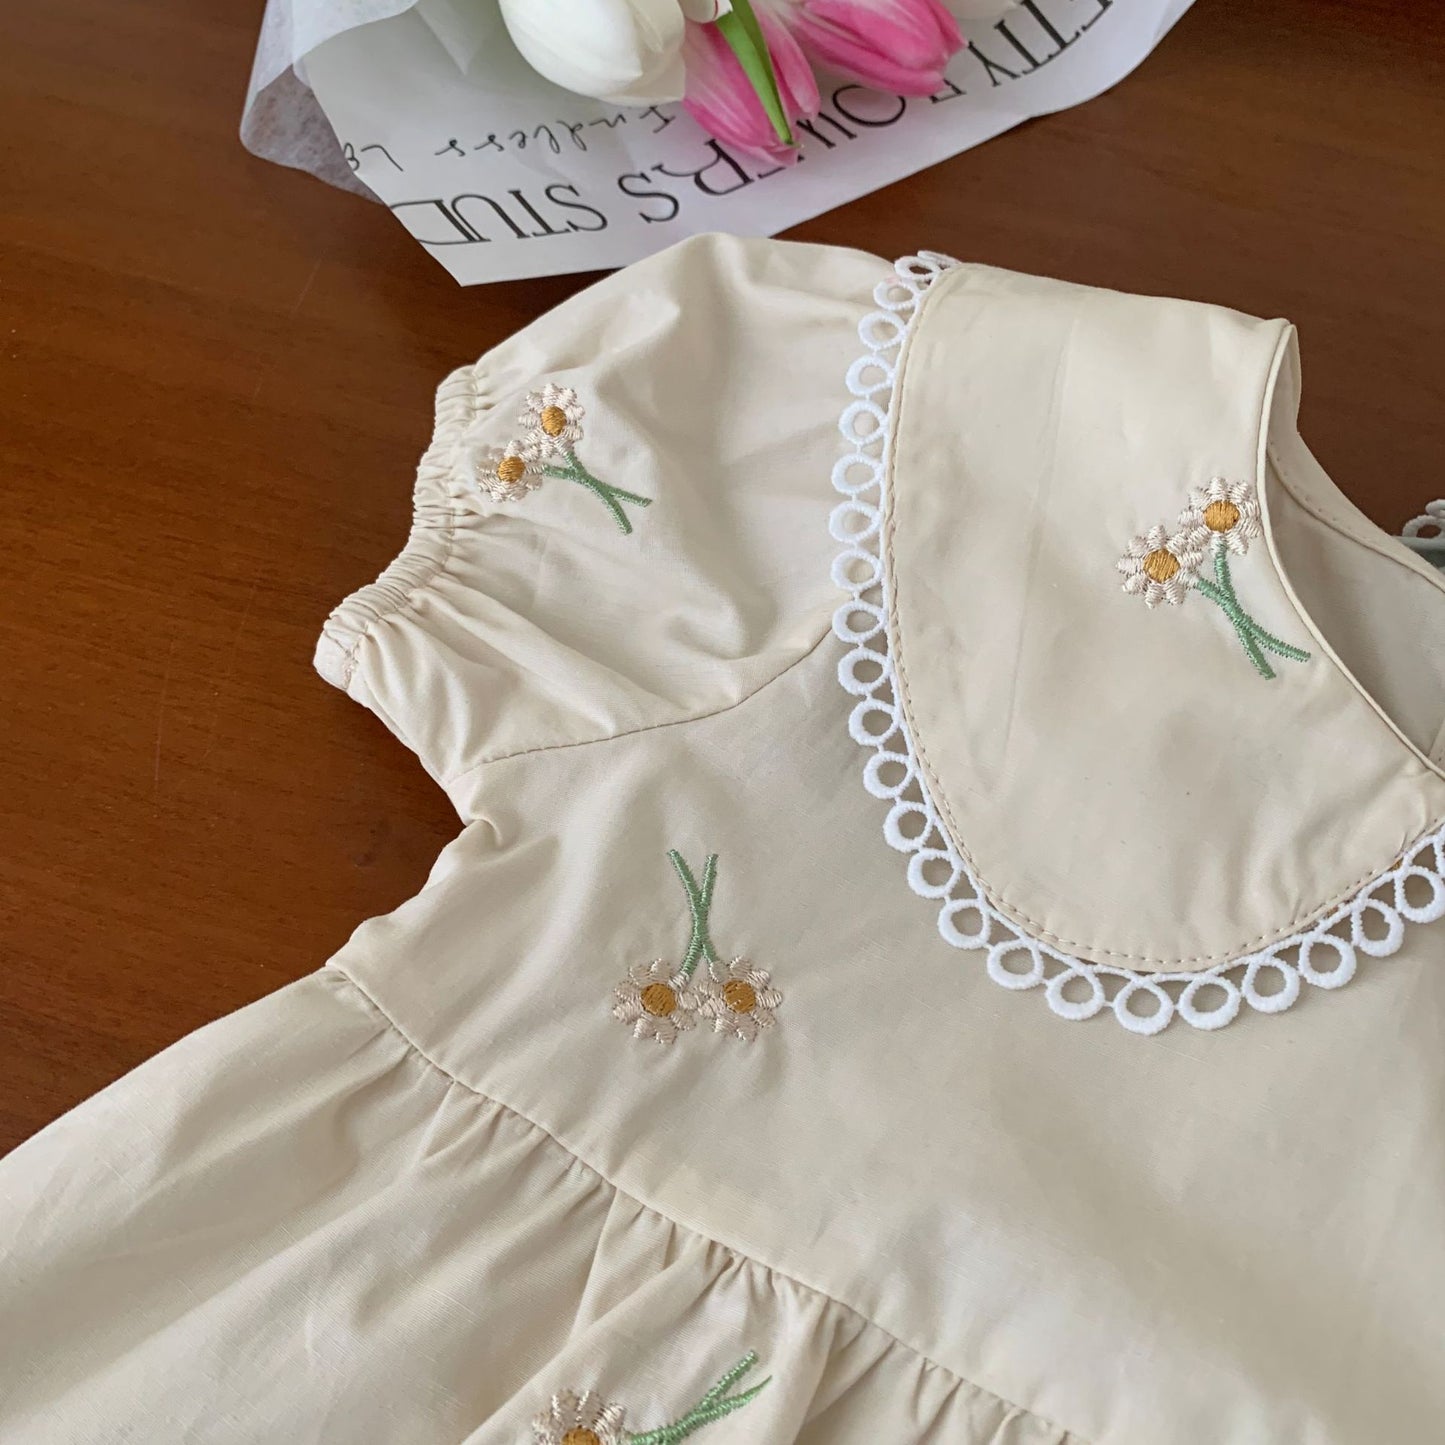 Cute Peter Pan Collar Embroidered Dress,Apricot/Green,12M to 6T.